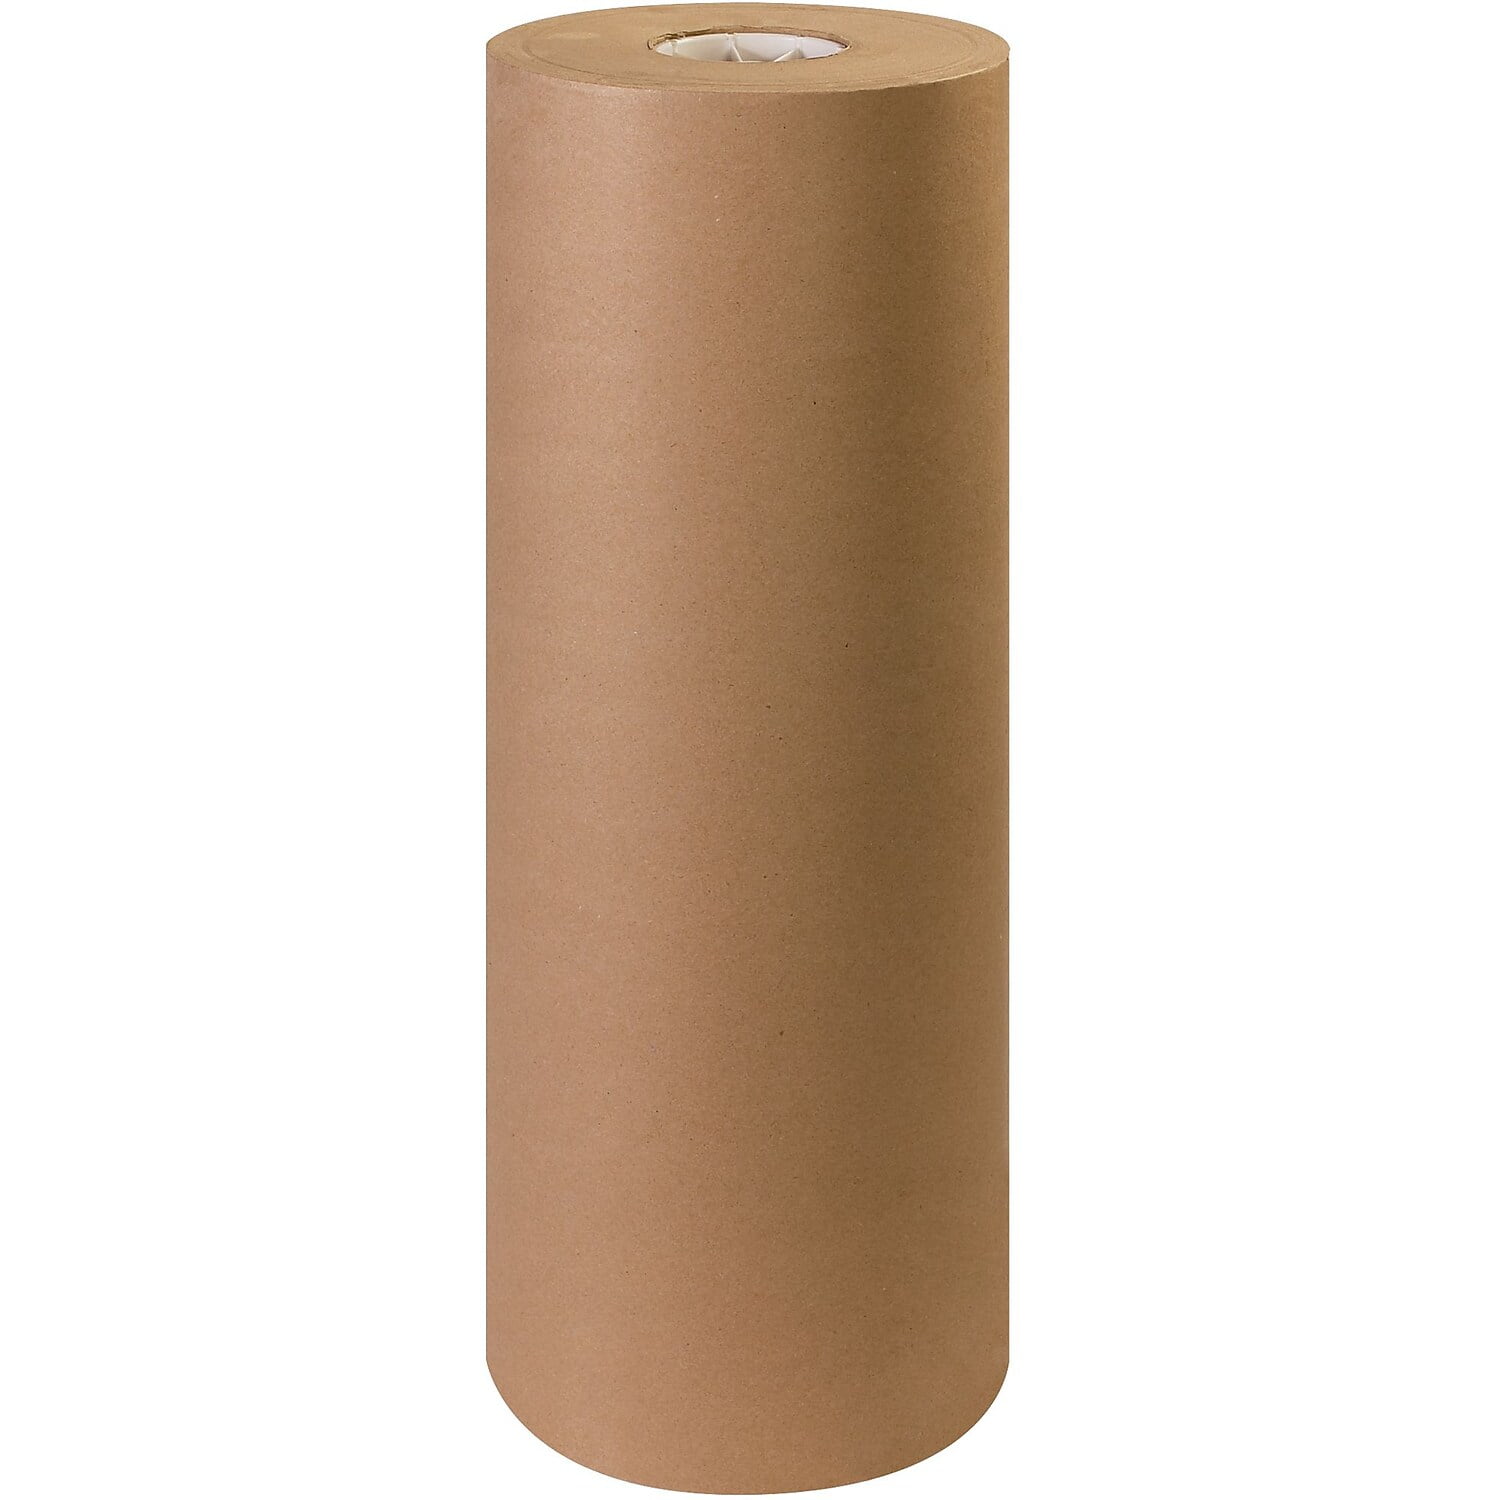 Pink Butcher Paper Roll With Paper Dispenser Box - 18 Inch by 175 Foot Roll  o